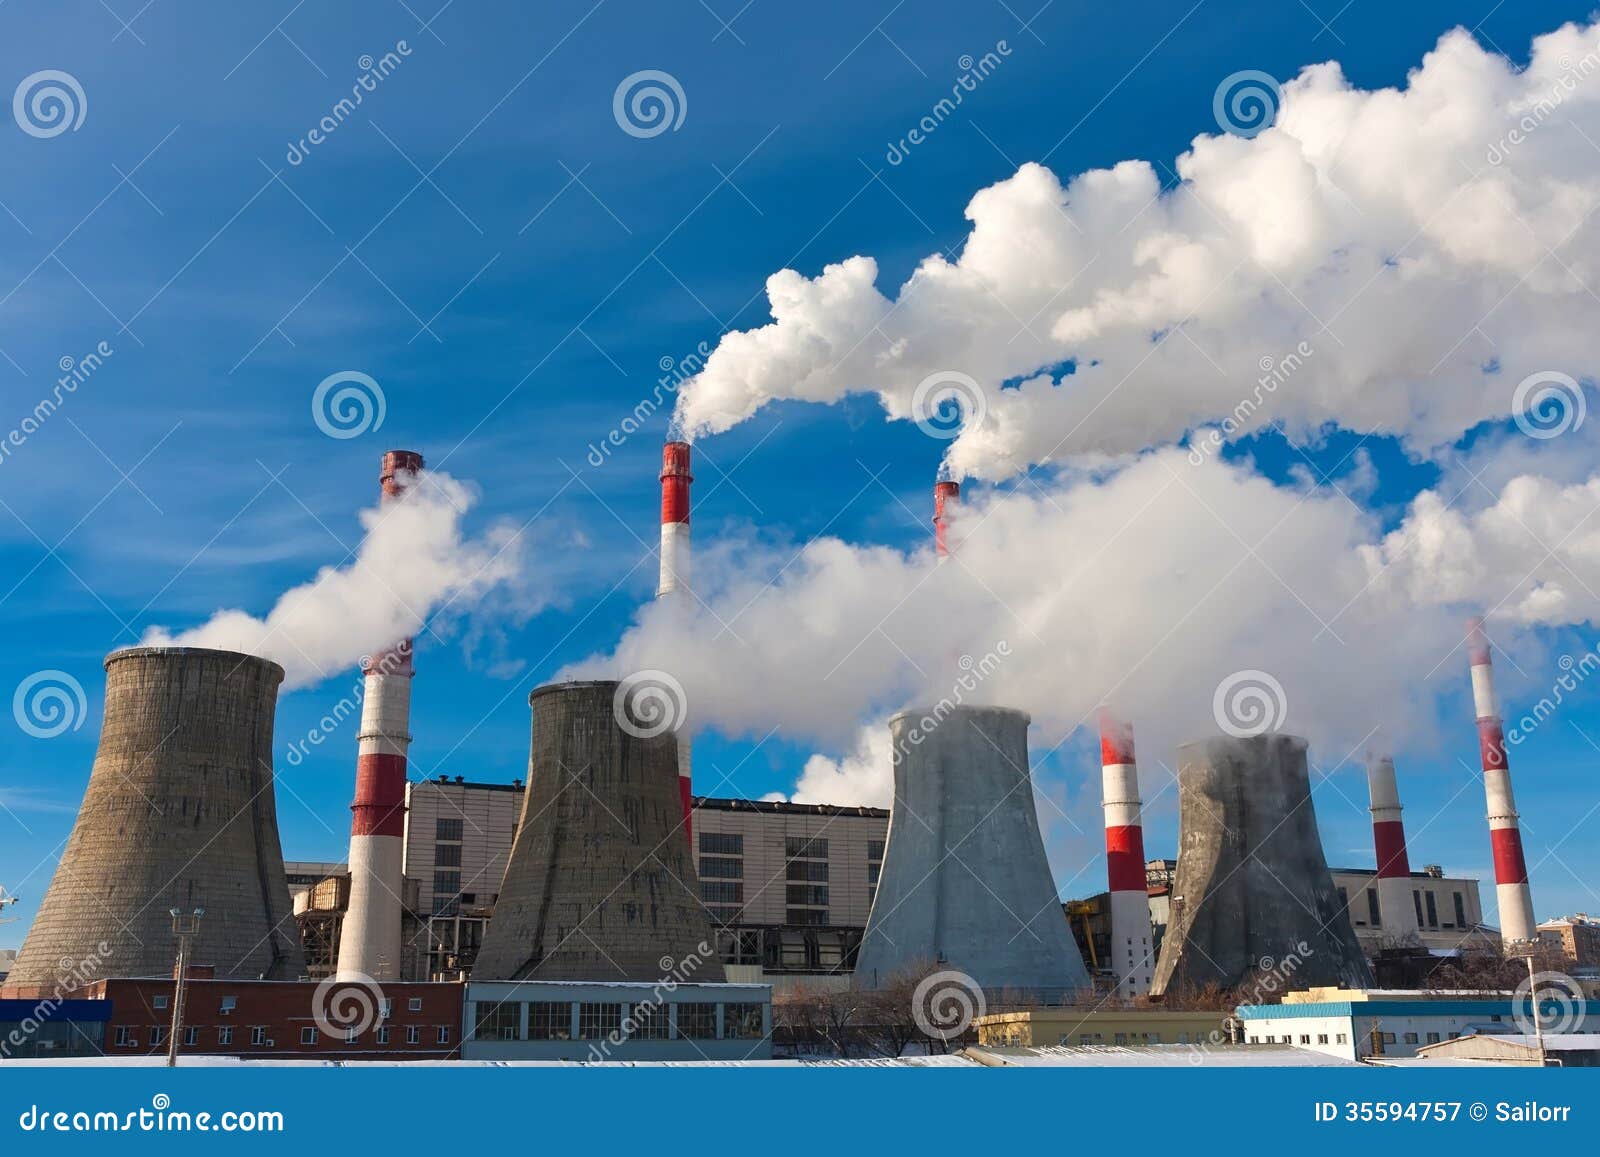 air-pollution-industrial-smoke-rising-power-station-cooling-towers-35594757.jpg